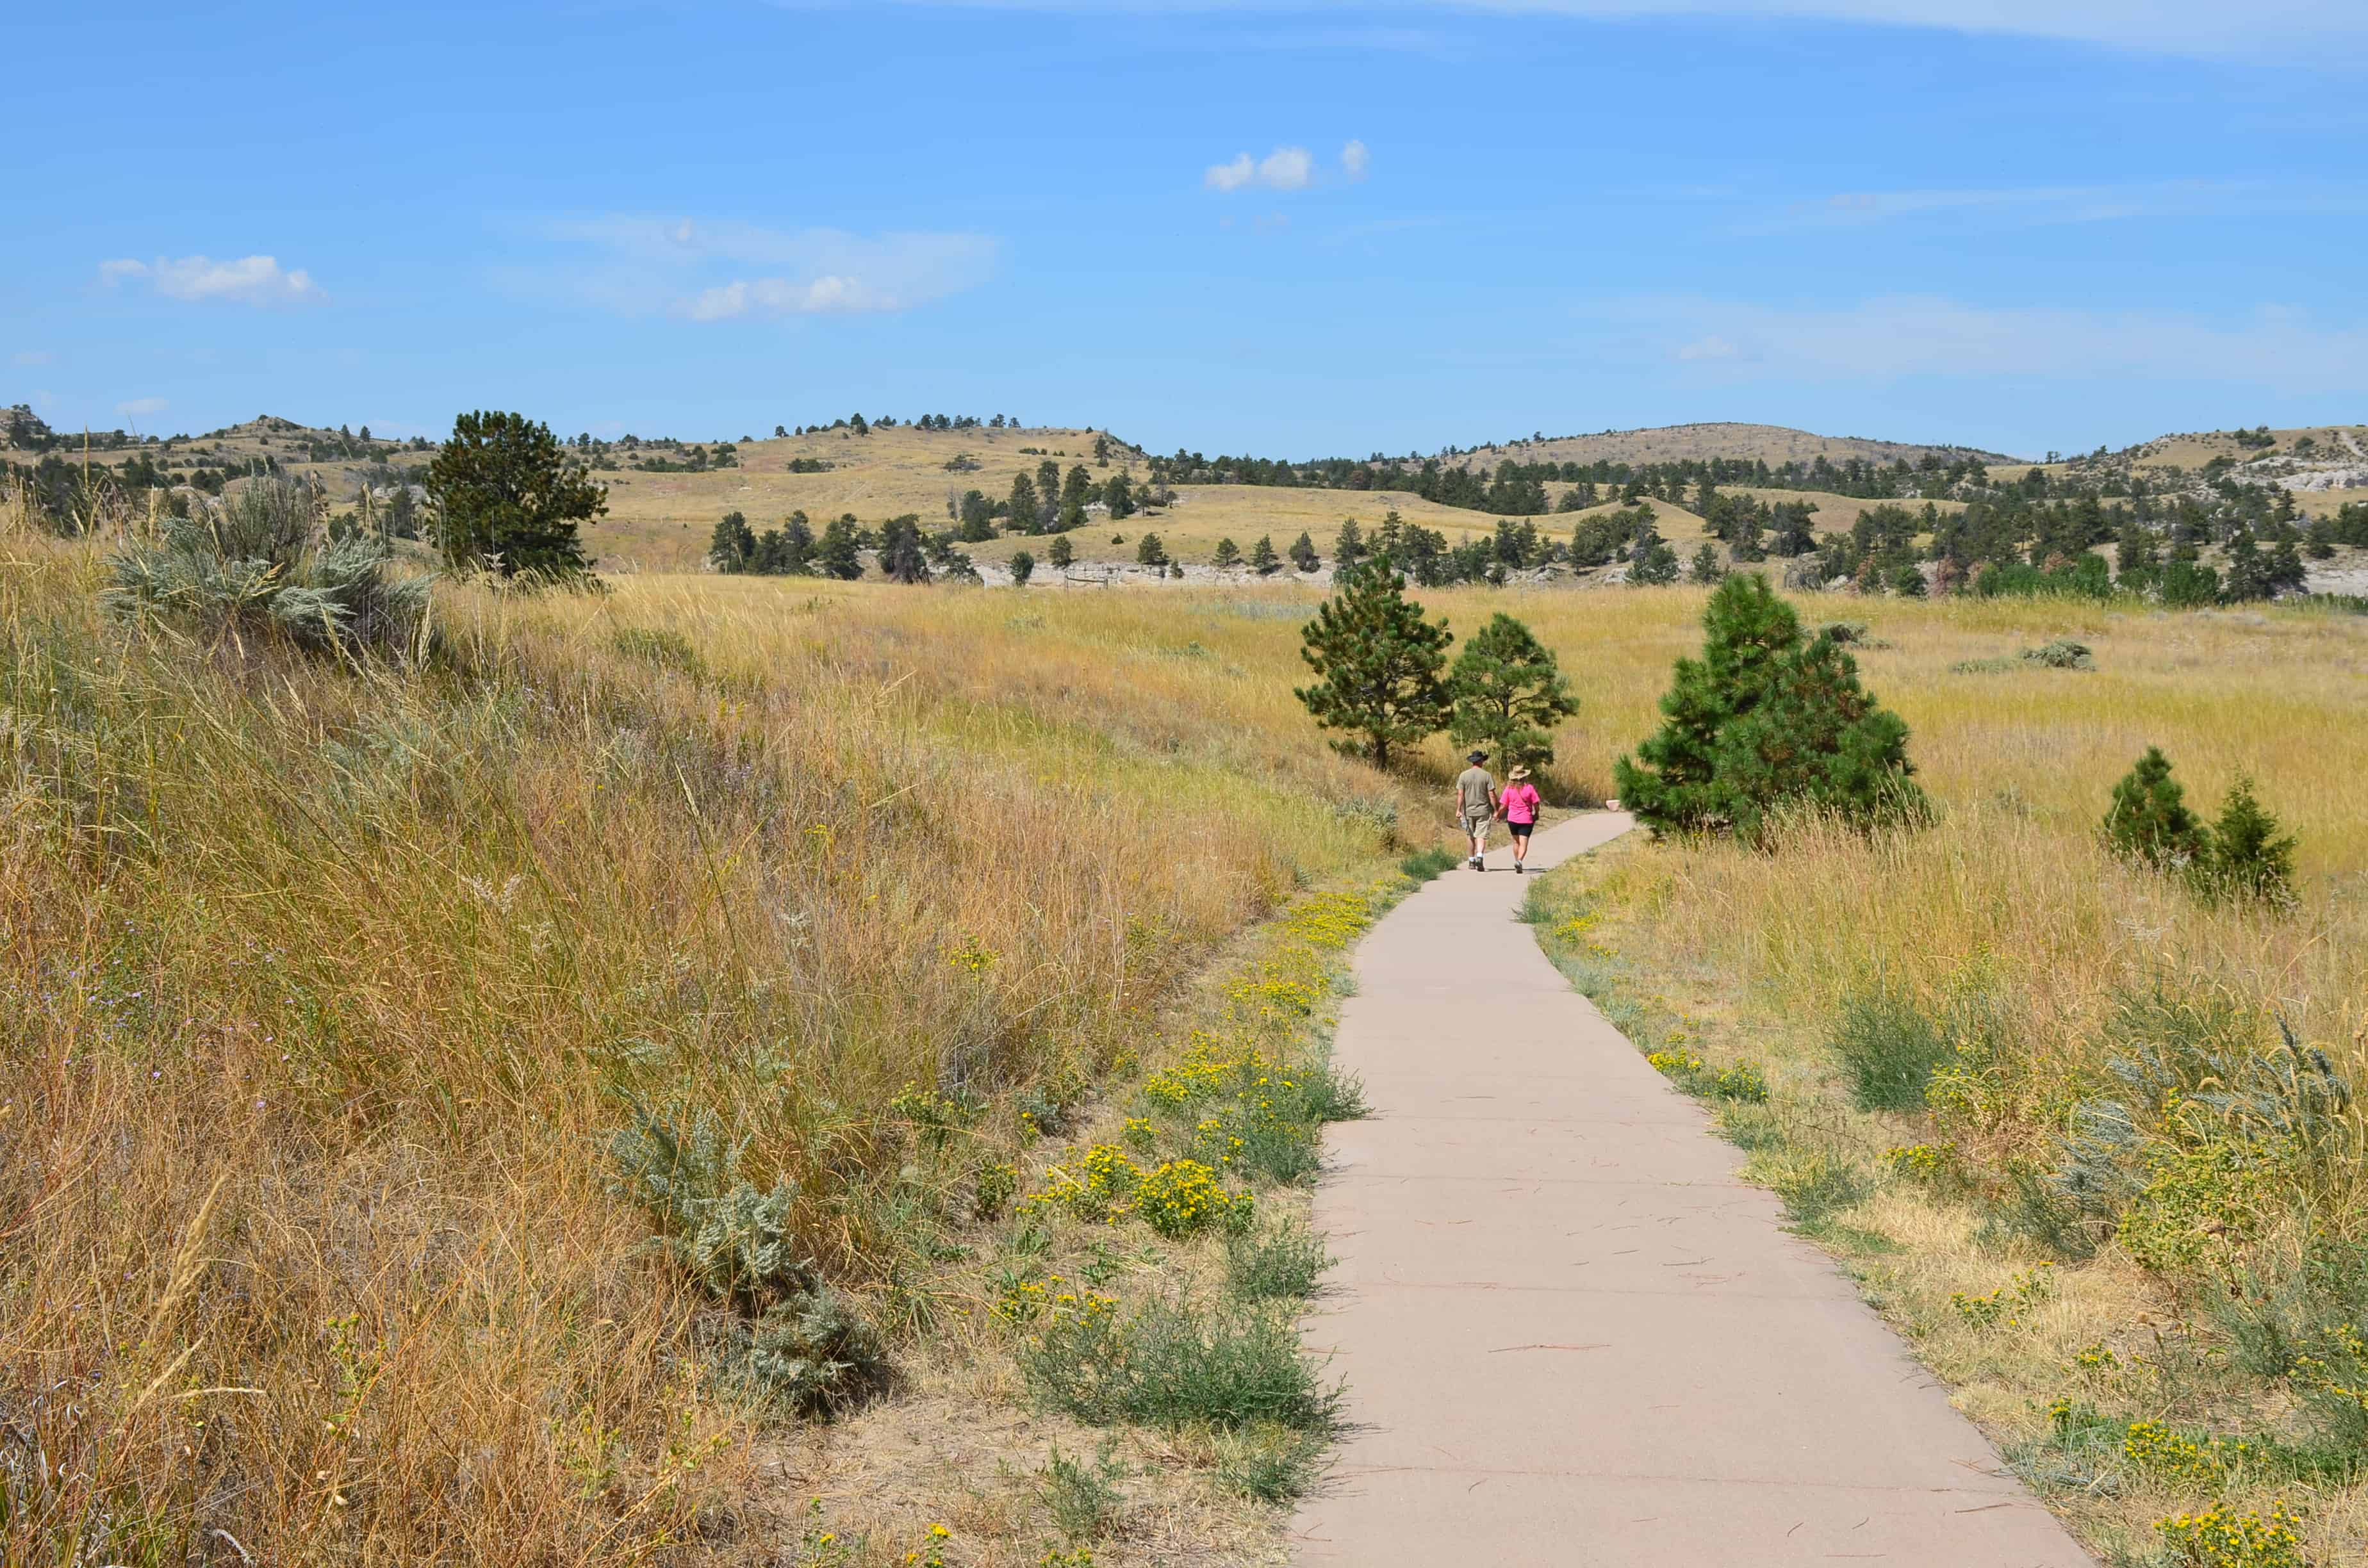 The path at Oregon Trail Ruts State Historic Park in Wyoming